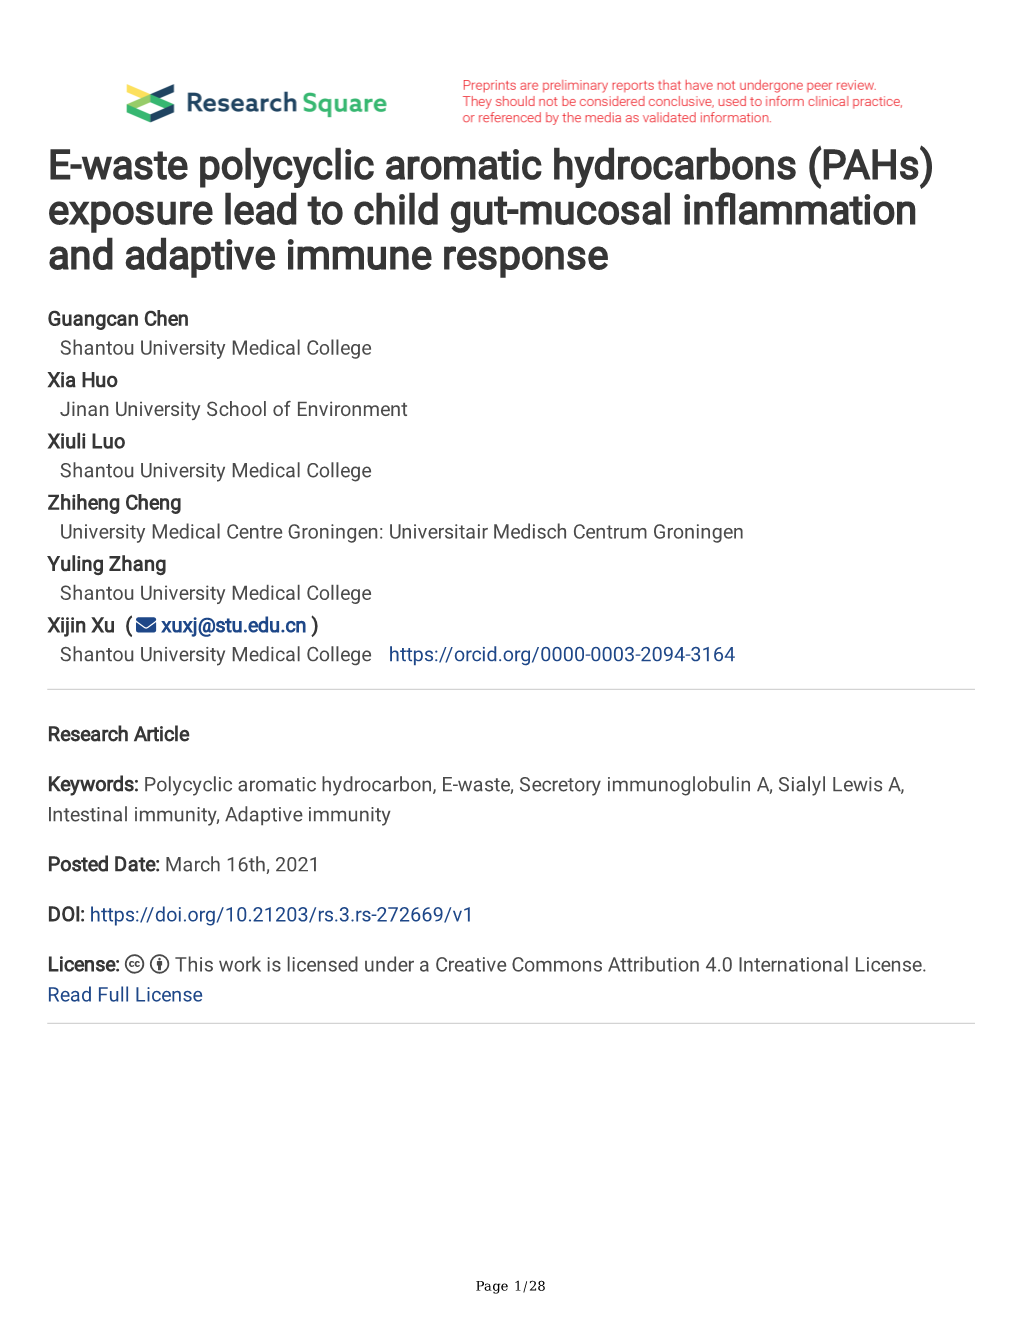 E-Waste Polycyclic Aromatic Hydrocarbons (Pahs) Exposure Lead to Child Gut-Mucosal Infammation and Adaptive Immune Response